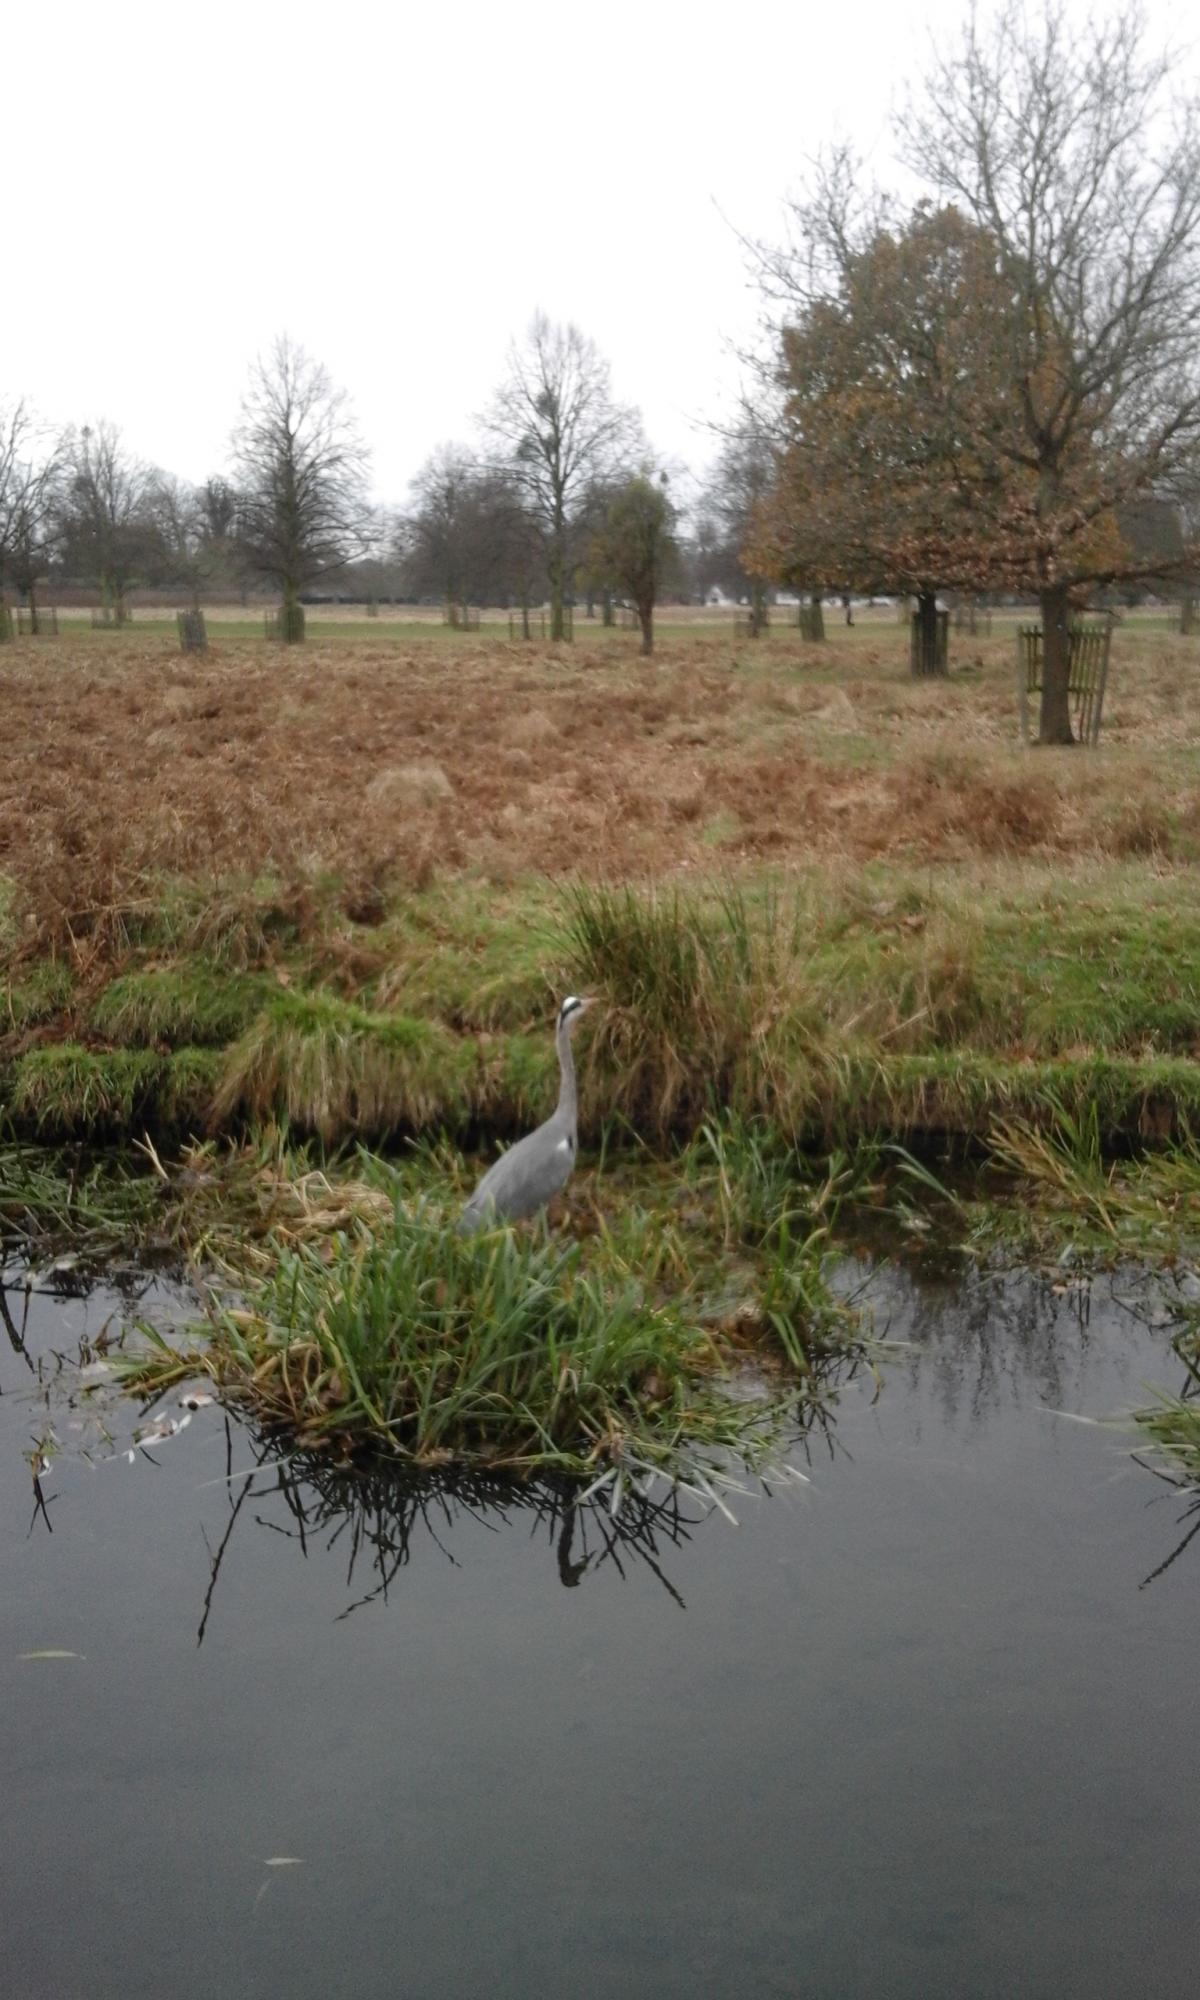 Katie Morton managed to snap a photo of this heron in Bushy Park last month.